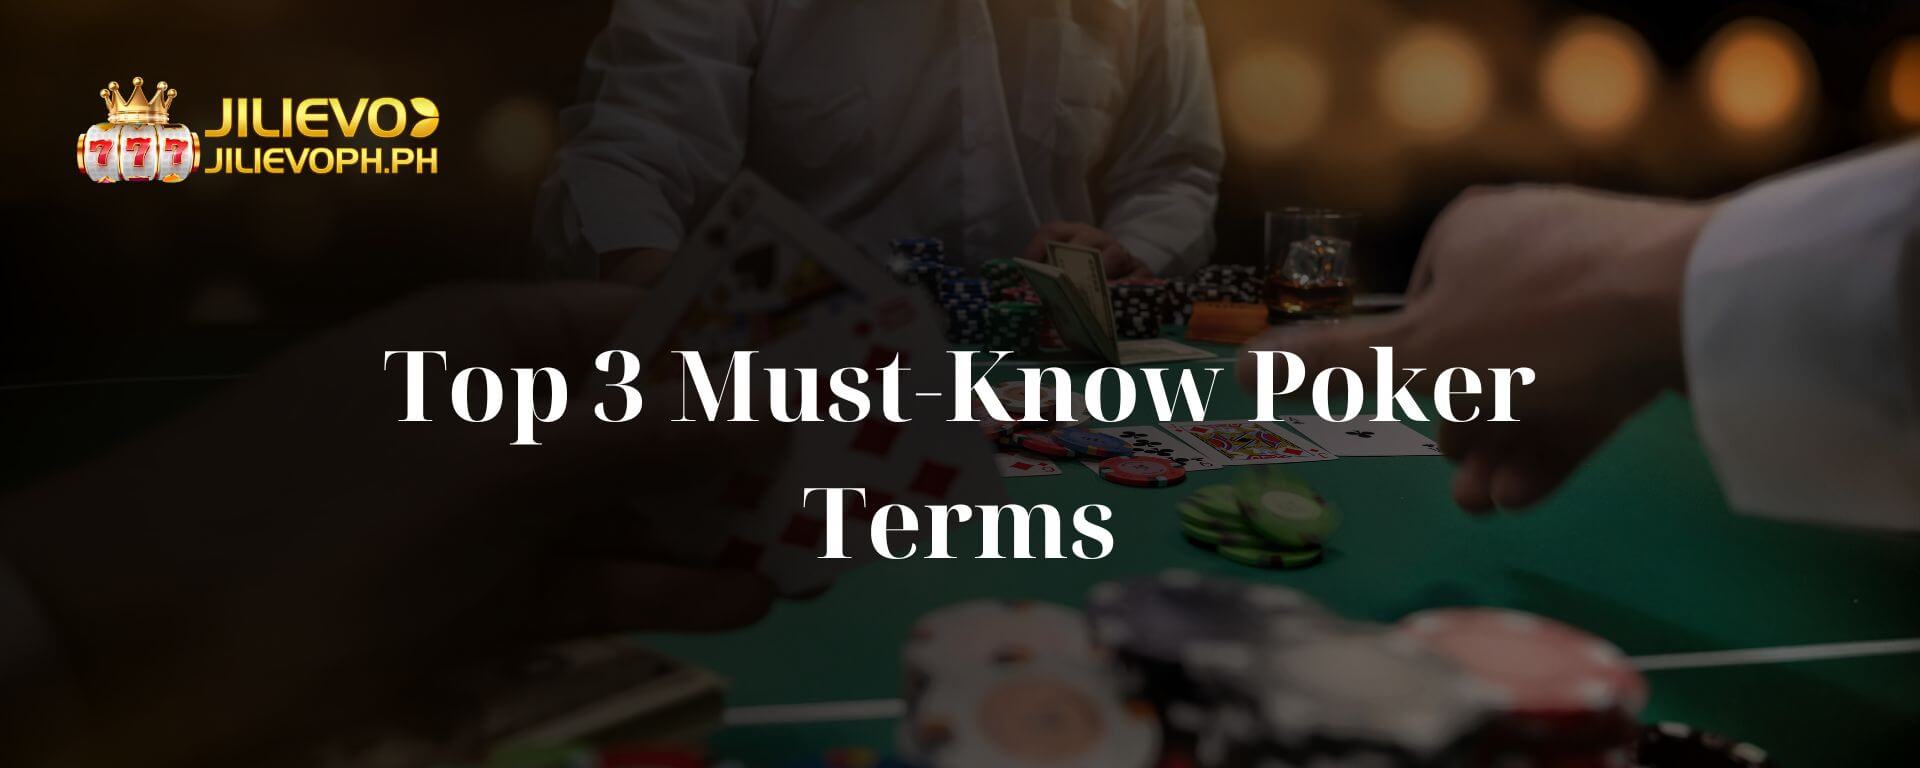 Top 3 Must-Know Poker Terms